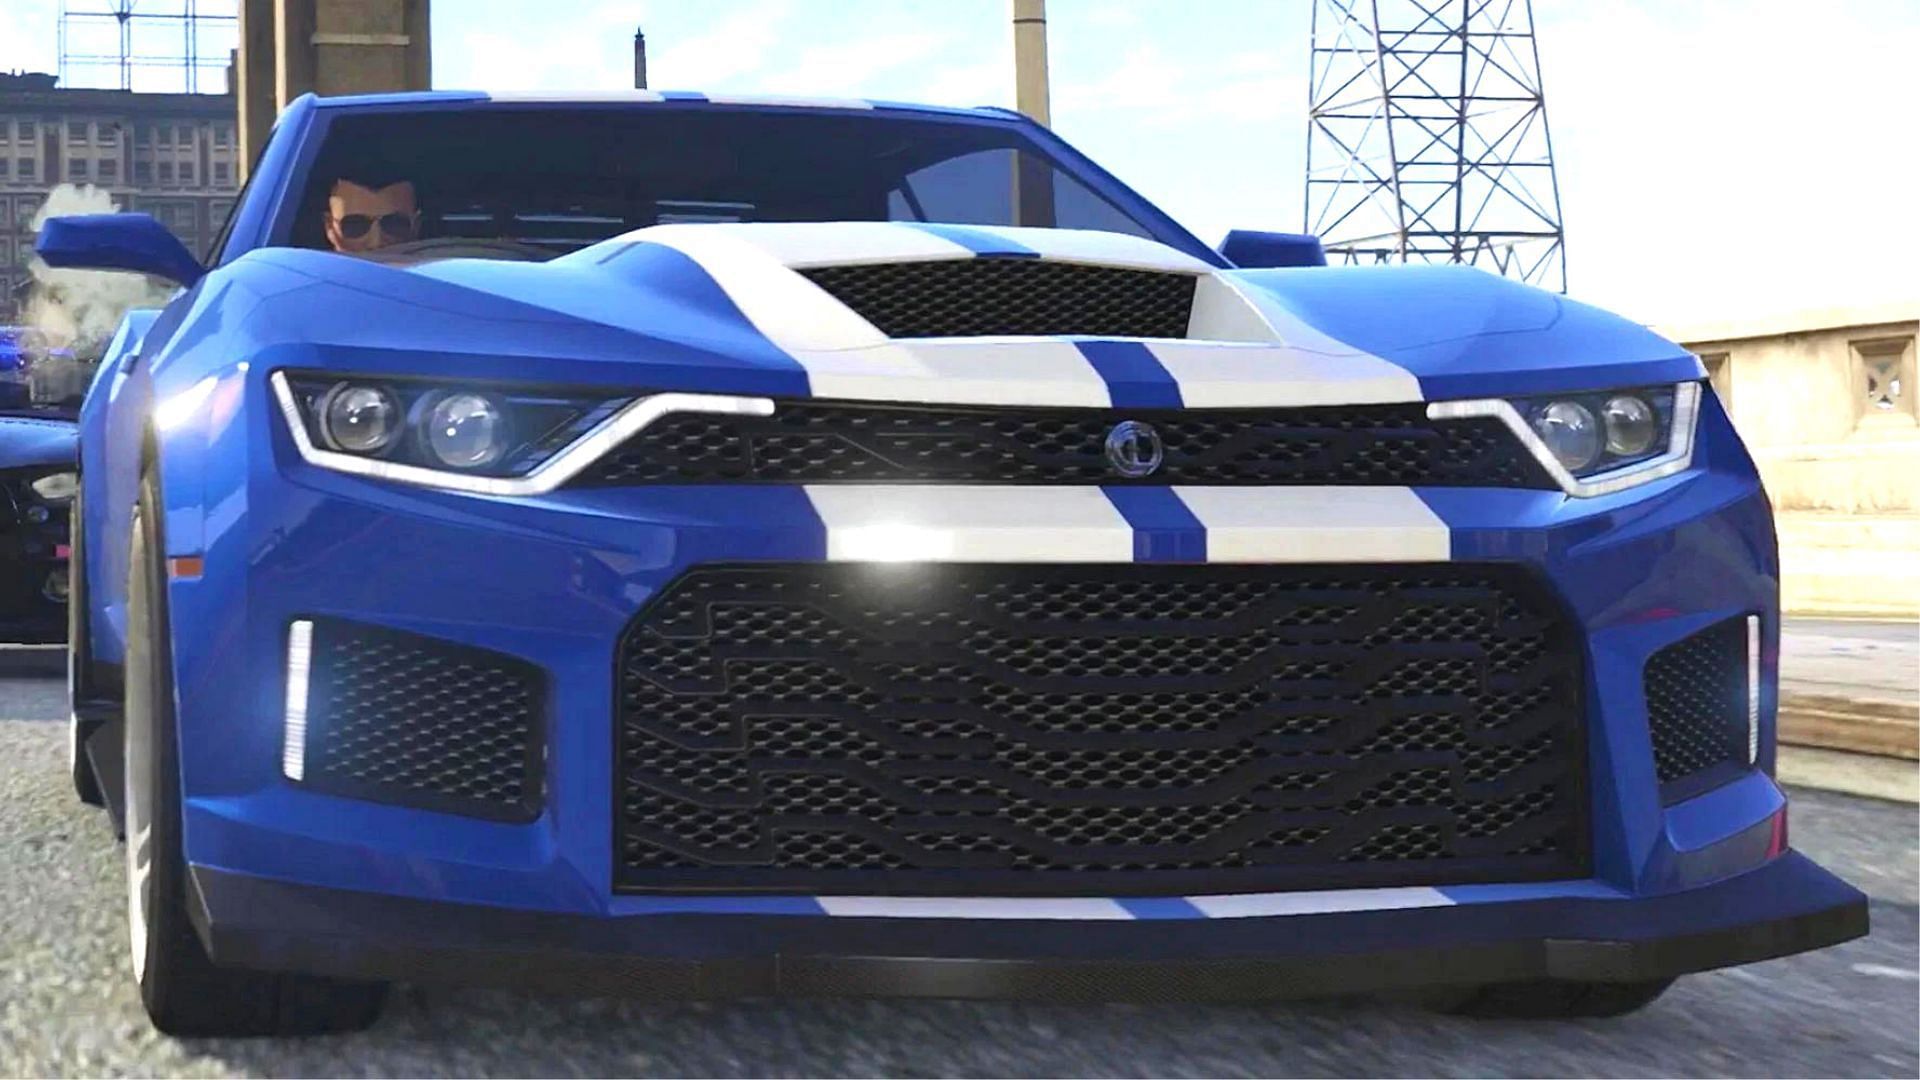 A brief about Vigero ZX in GTA Online, including its performance, customization, &amp; more (Image via Sportskeeda)